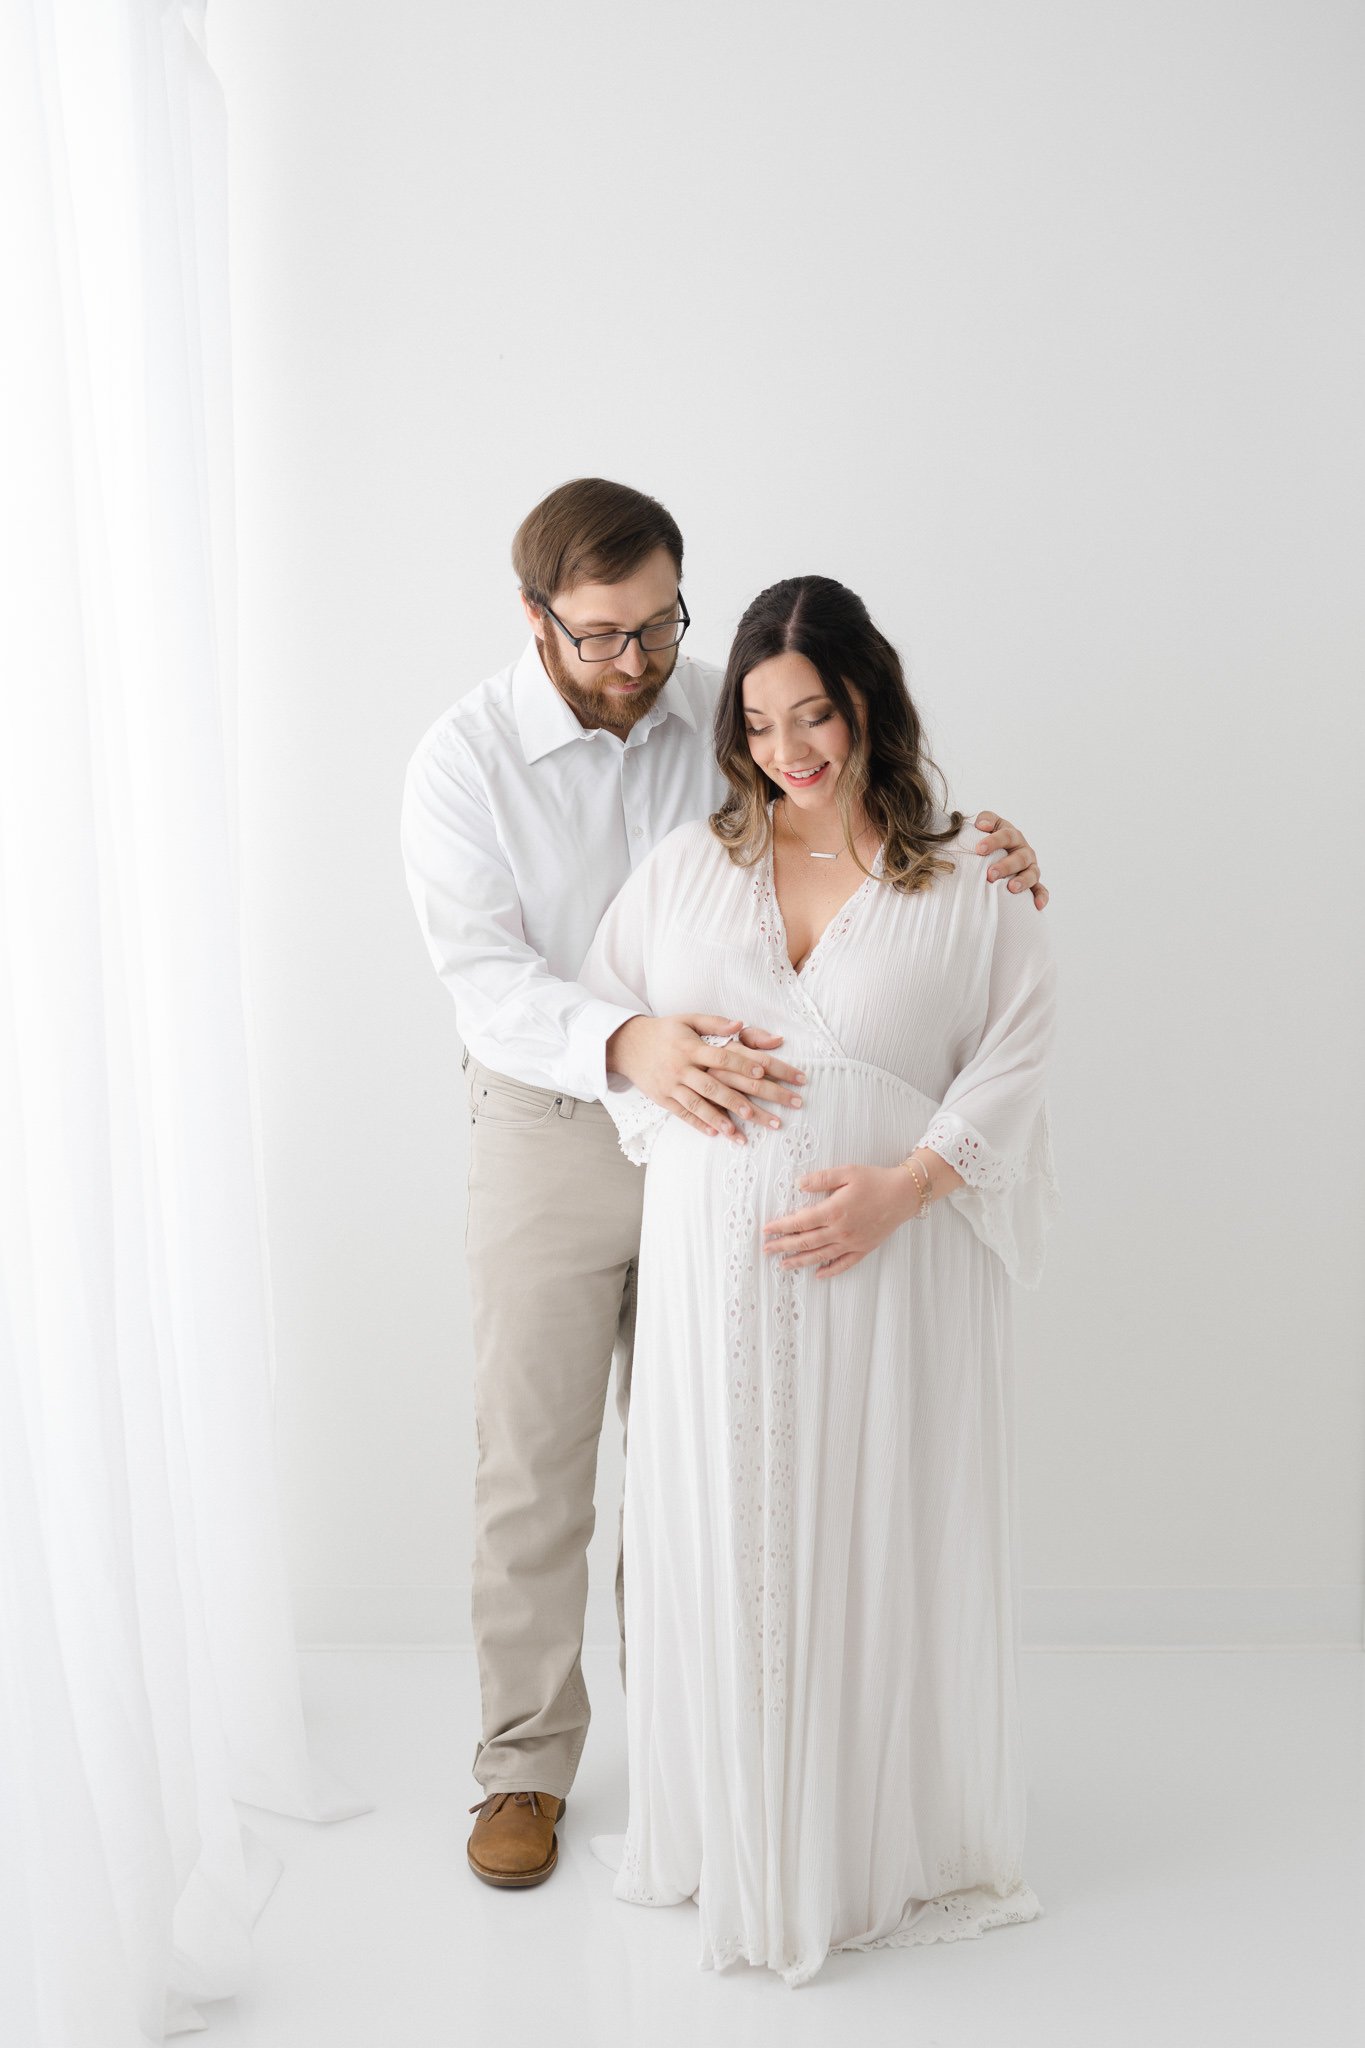  A dad wearing a white shirt and tan pants feels the baby kicking by Nicole Hawkins Photography. feel a baby kick white studio #NicoleHawkinsPhotography #NicoleHawkinsMaternity #Babyontheway #studiomaternityNJ #whitestudiomaternityportraits #NYmatern